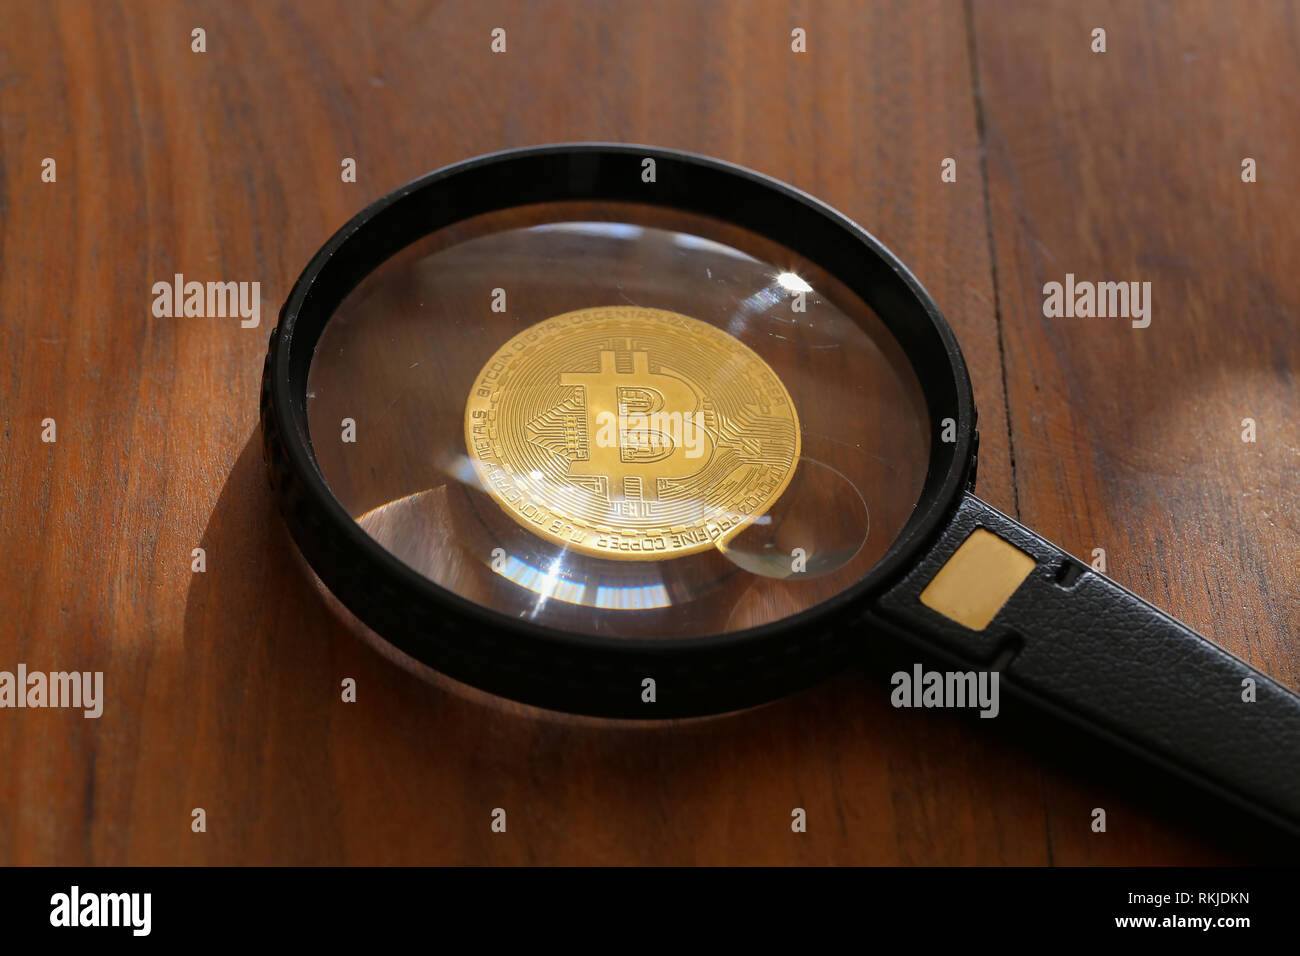 Magnifying glass with gold bar pile of gold coins under it